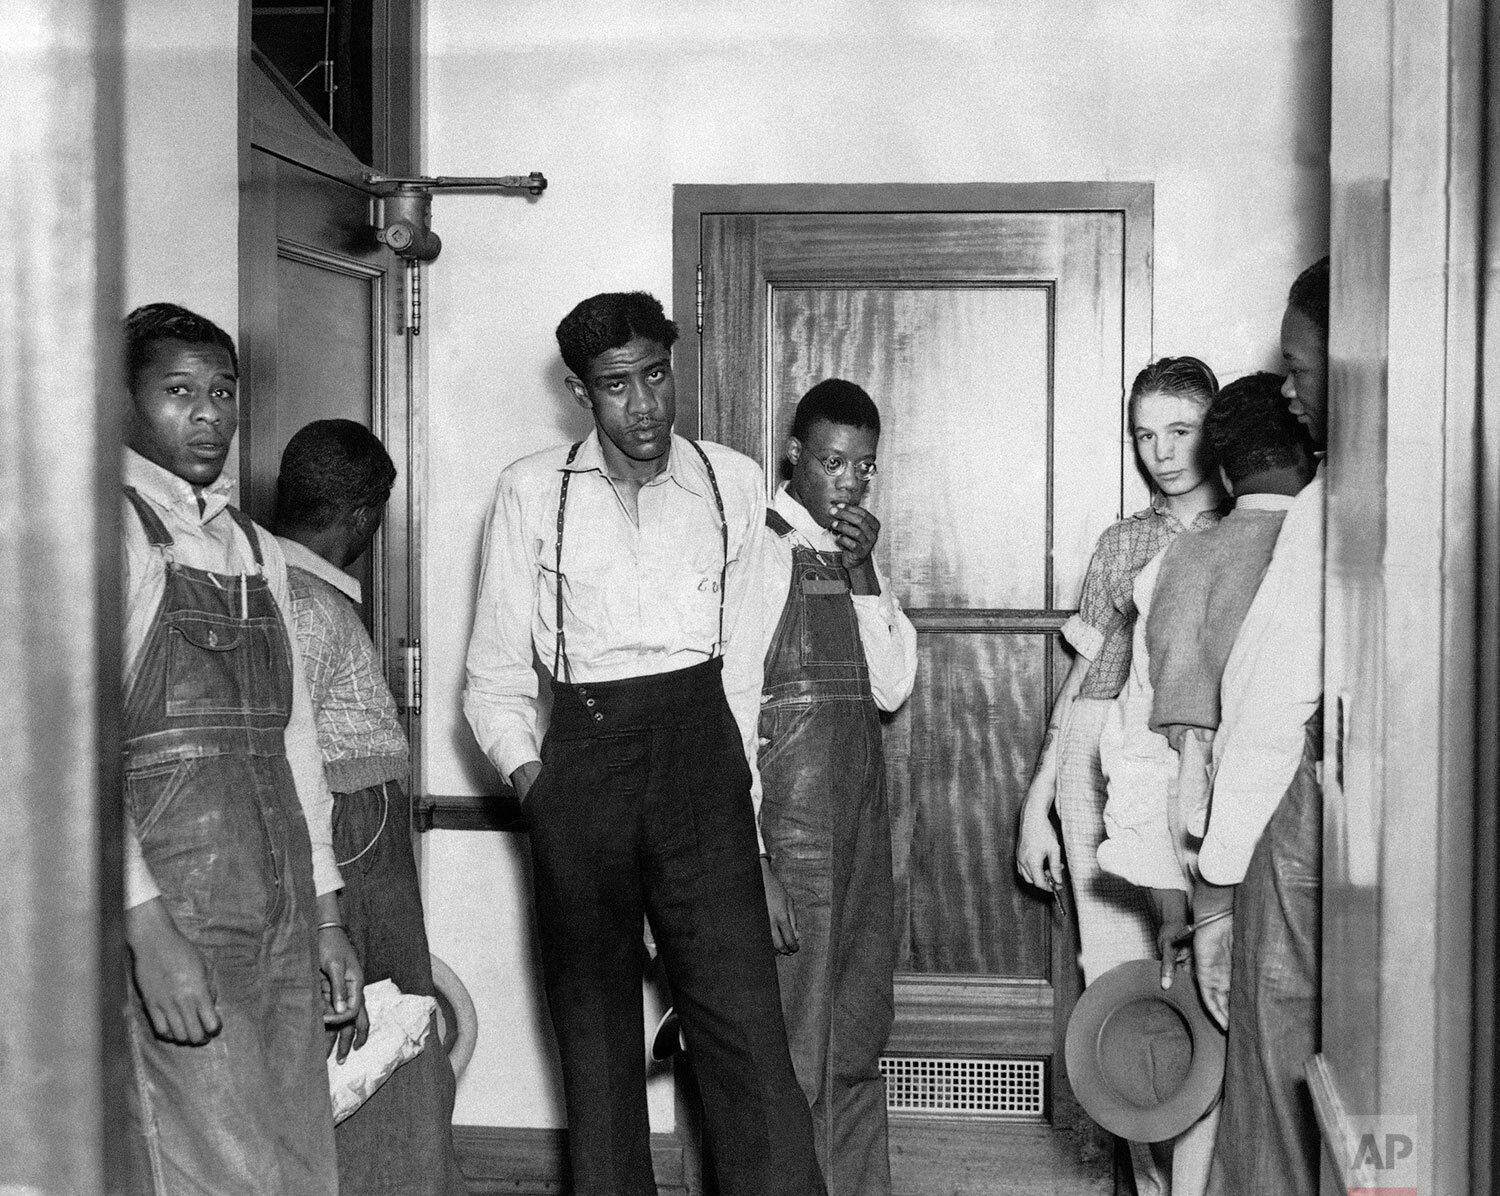  In this 1937 photo, the Scottsboro defendants go back to the cells they have occupied for six years in Birmingham, Ala., following arraignment proceedings in Decatur, Ala. (AP Photo) 